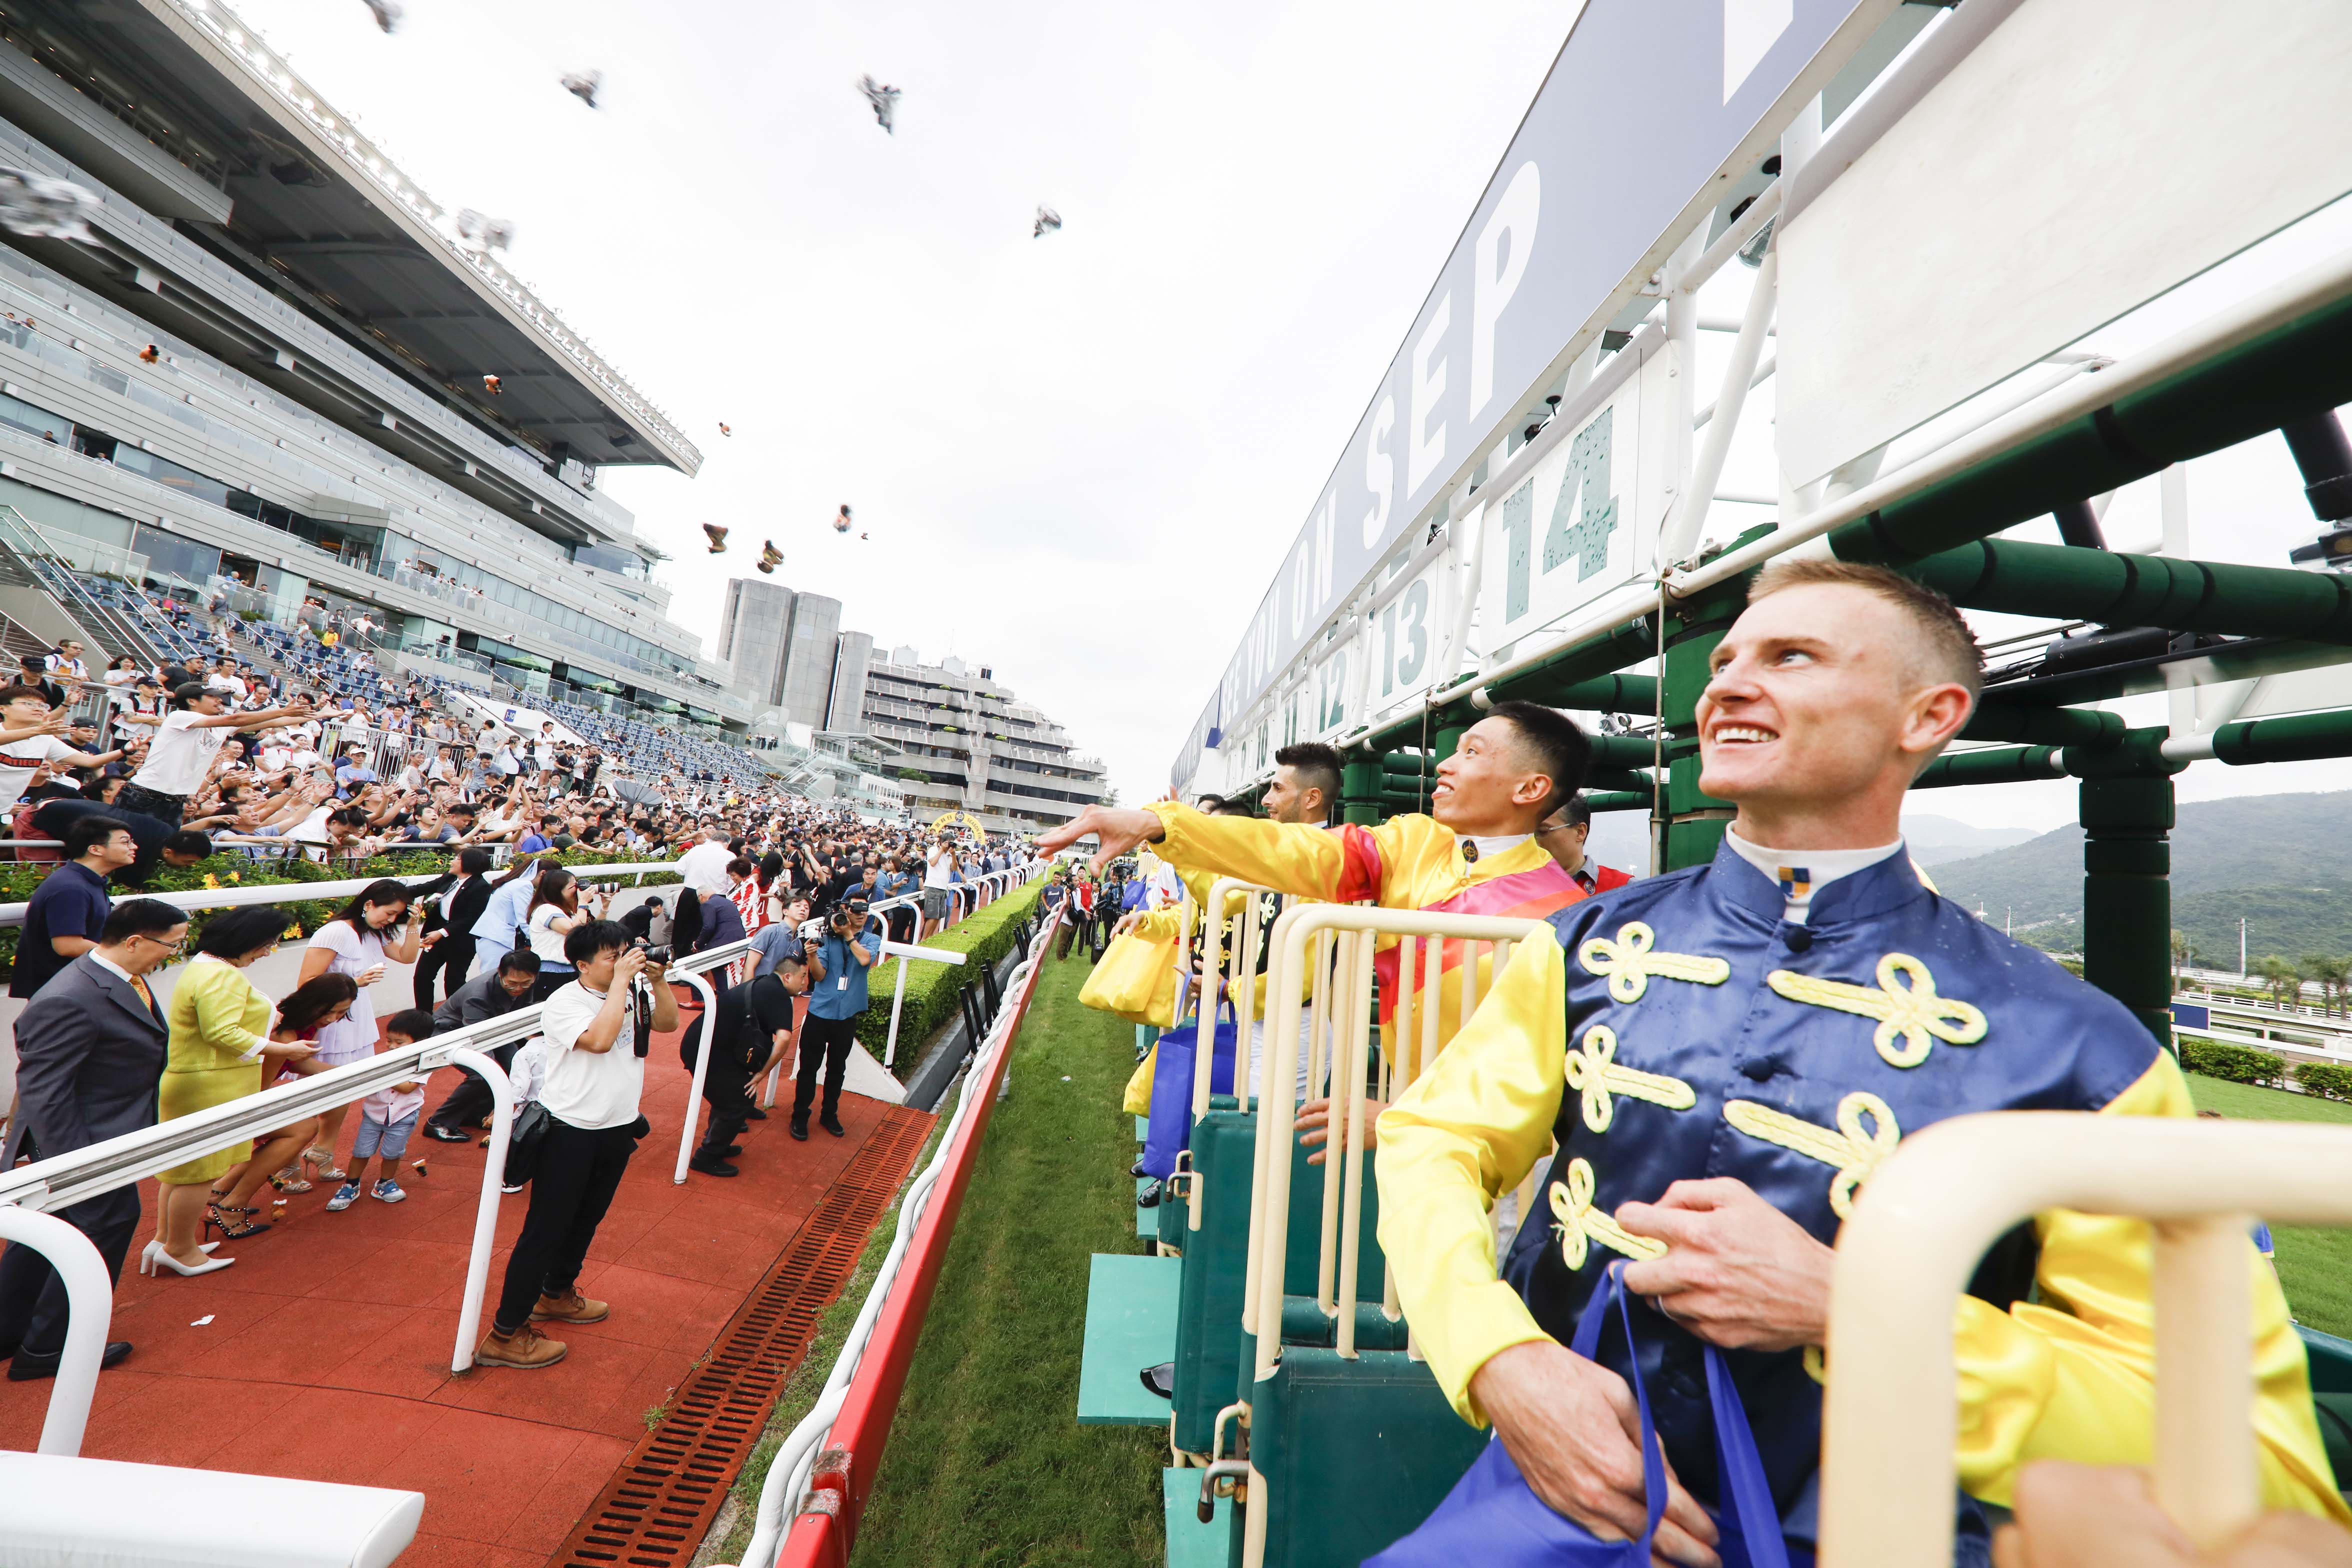 Jockey Parade: Jockeys will join the traditional parade out on the track to thank fans for their support.